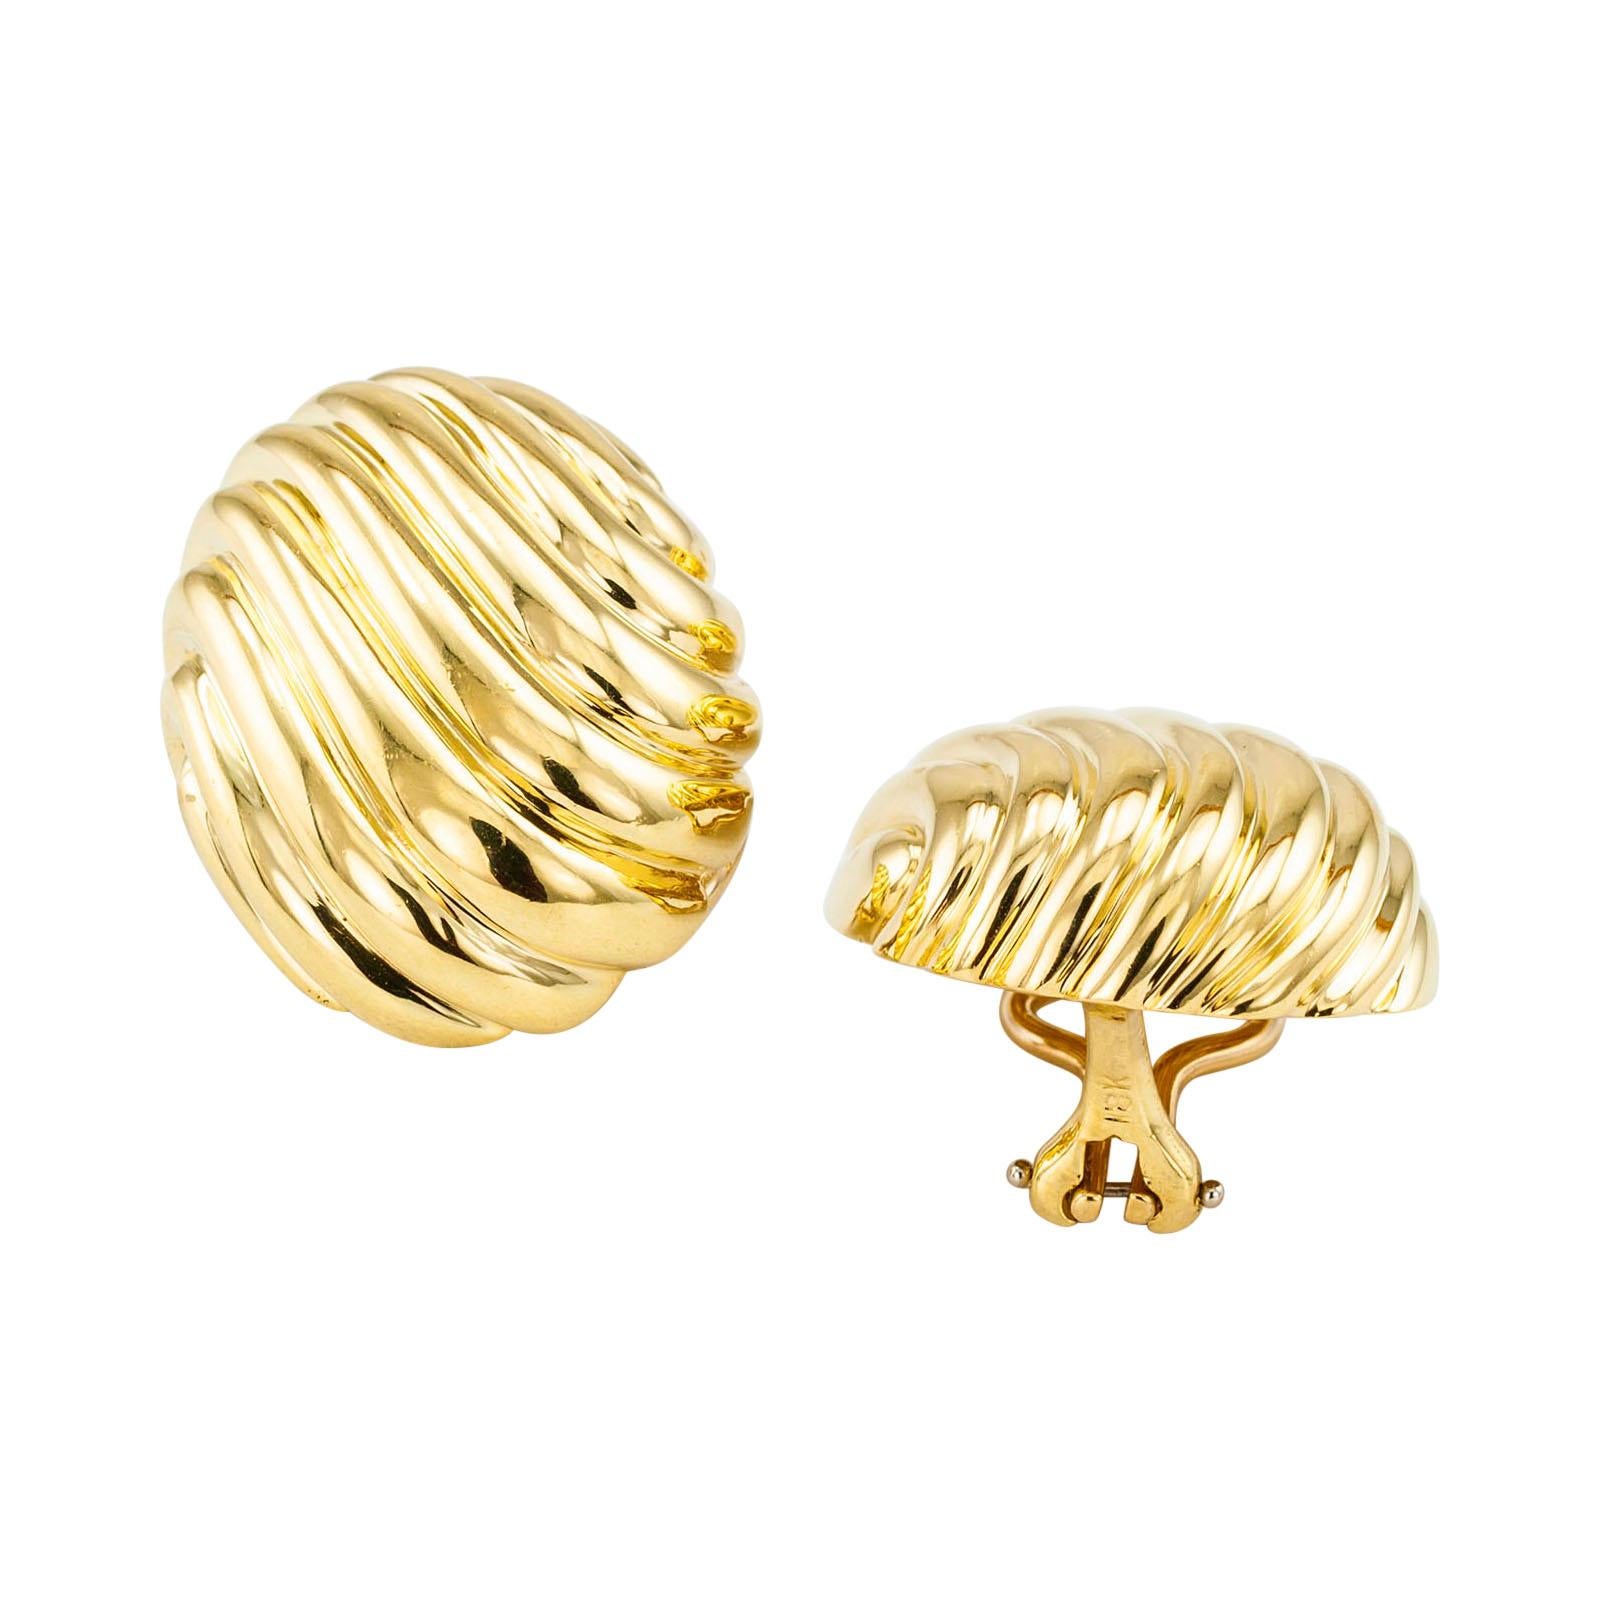 Fluted yellow gold ear clips.

DETAILS:
Button style fluted yellow gold omega clip back earrings circa 1970.
METAL: 18-karat yellow gold.
MEASUREMENTS: approximately 1 1/16” (2.7 cm) by 13/16” (2.1 cm), 22.7 grams.
CONDITION: high magnification